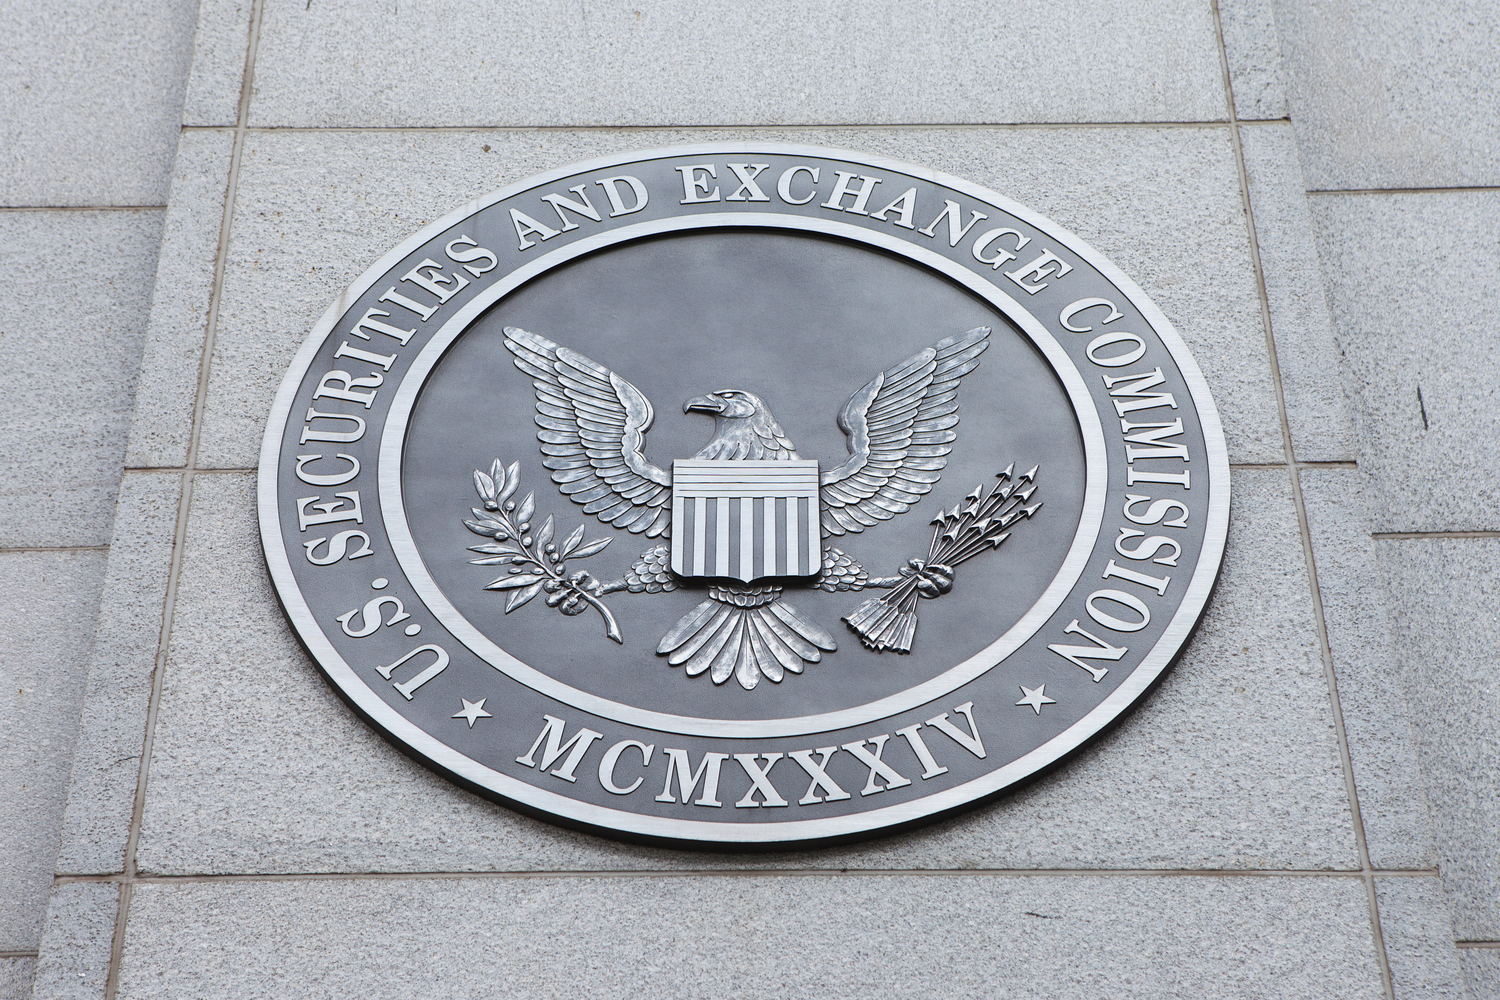 ETF Tied To Bitcoin Futures Withdrawn After SEC Staff Request